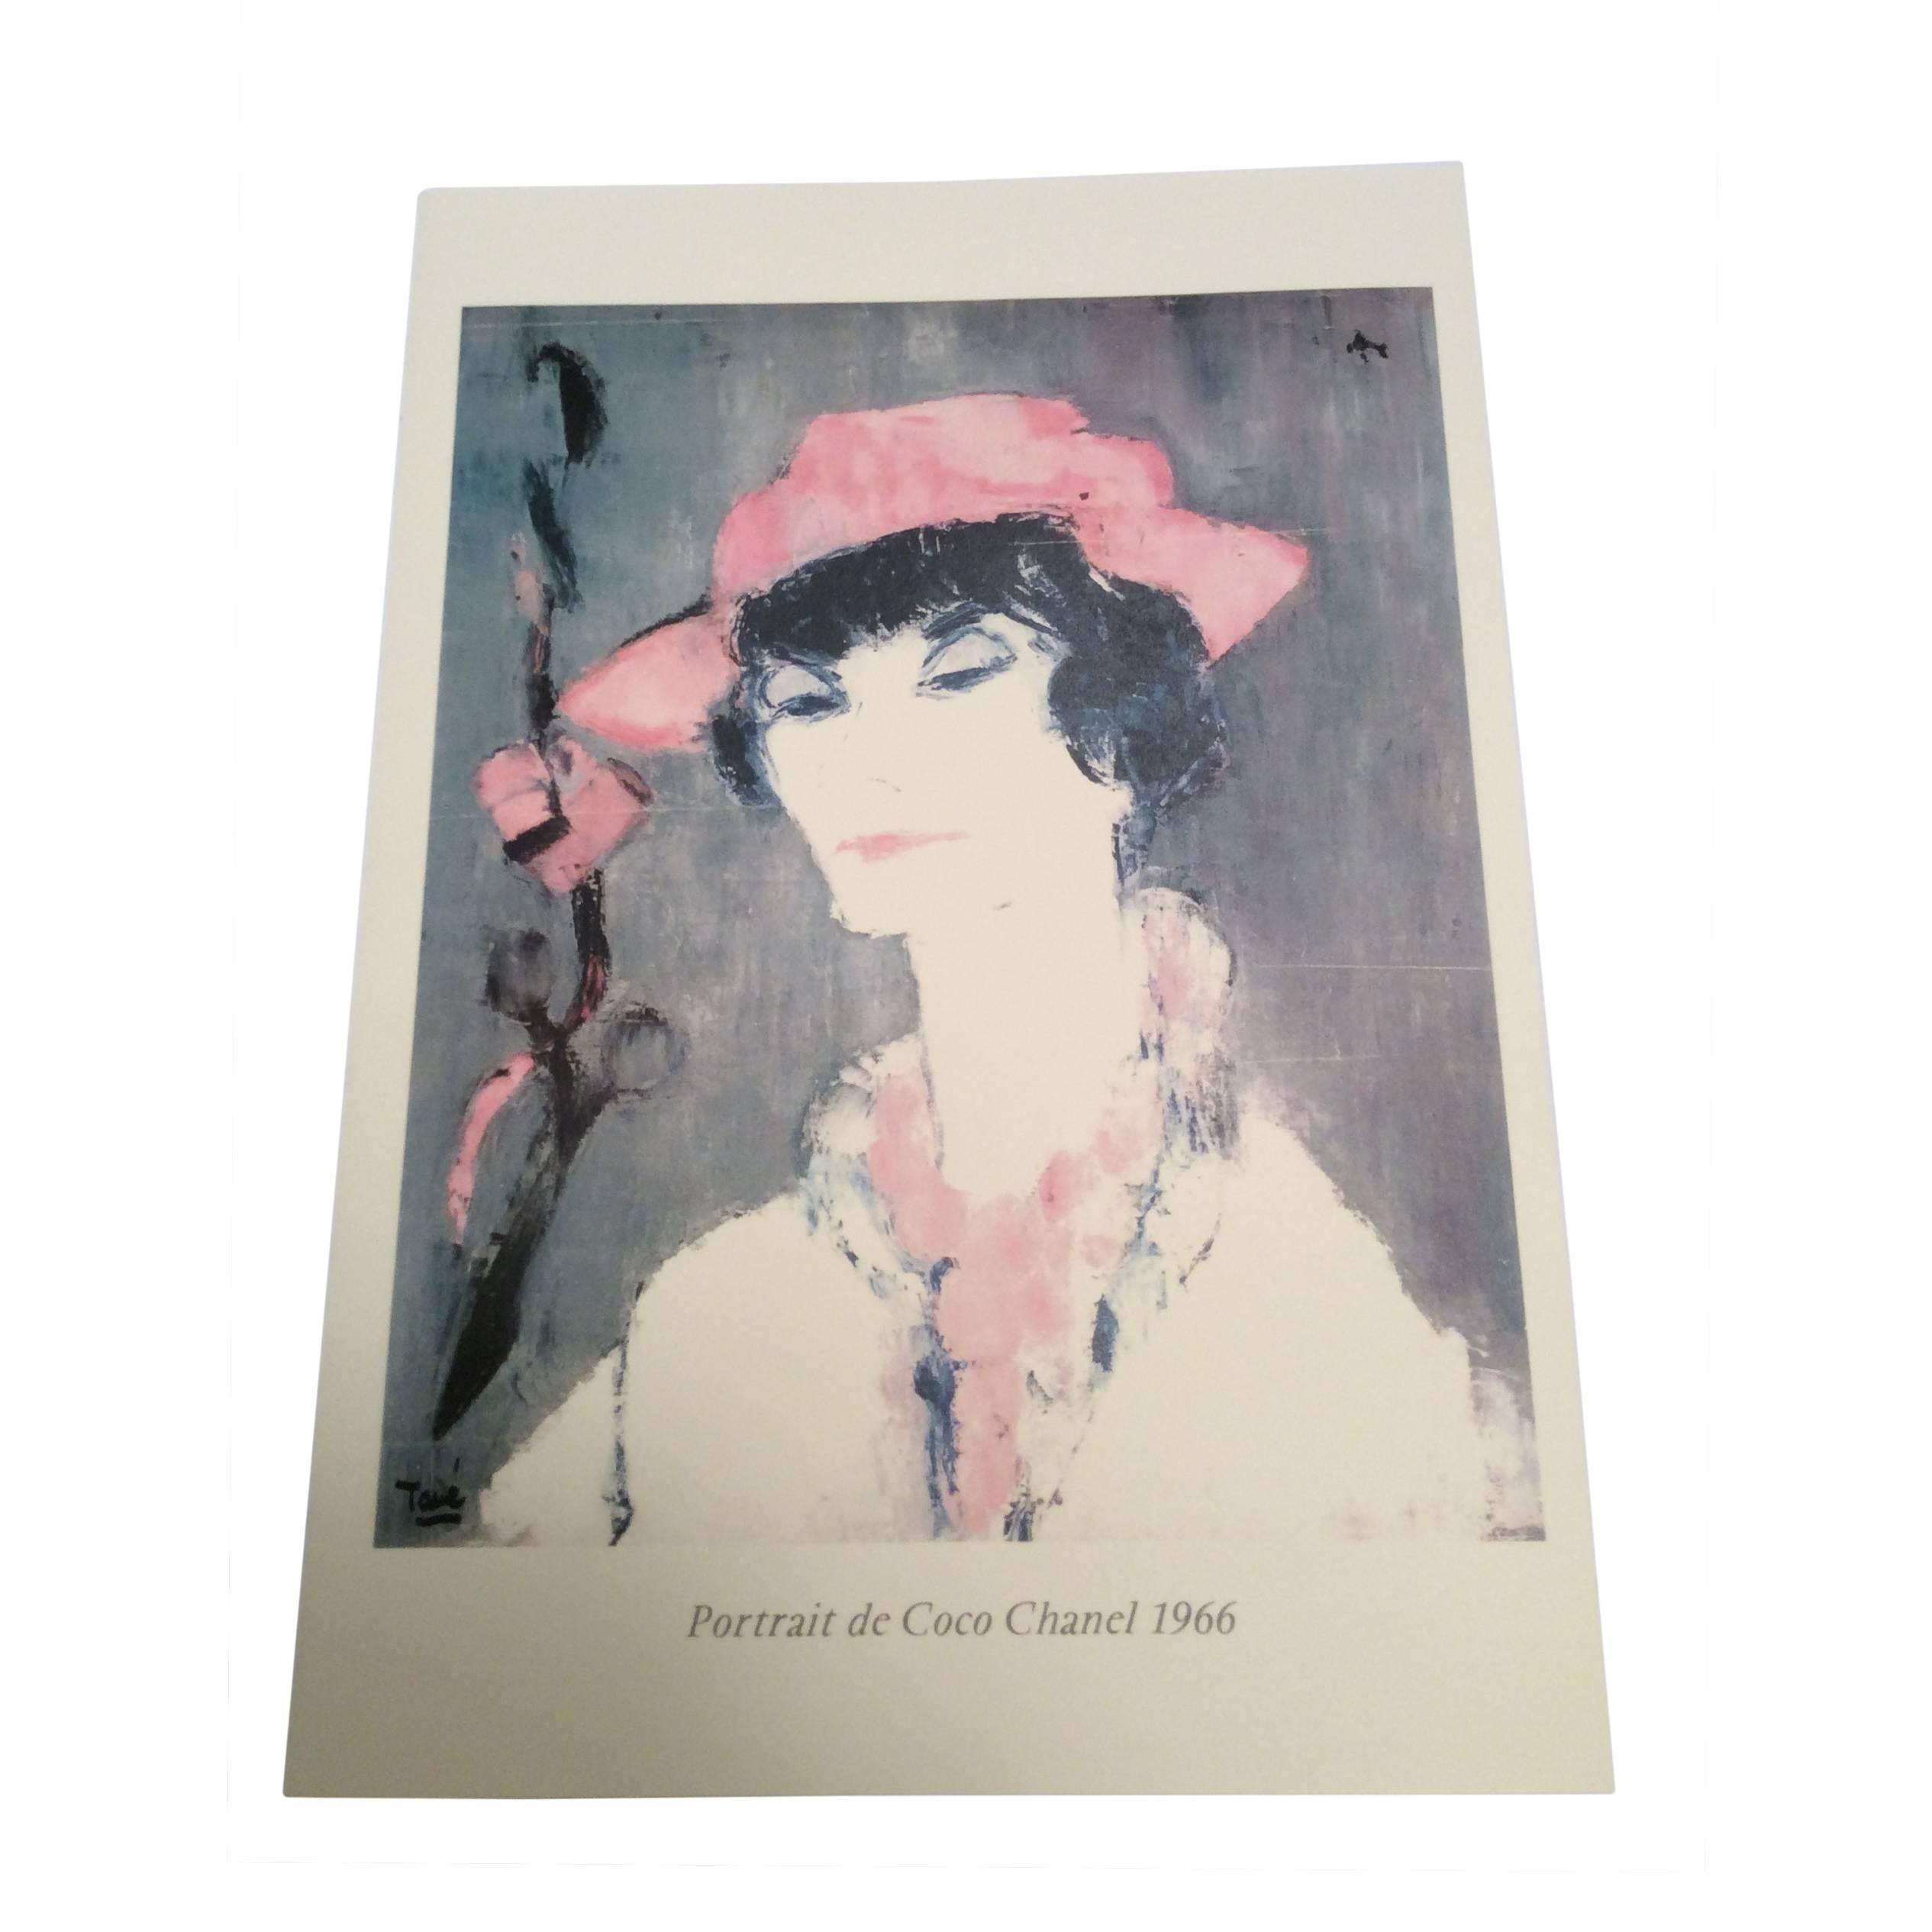 Print of Coco Chanel Portrait from 1960's Rare